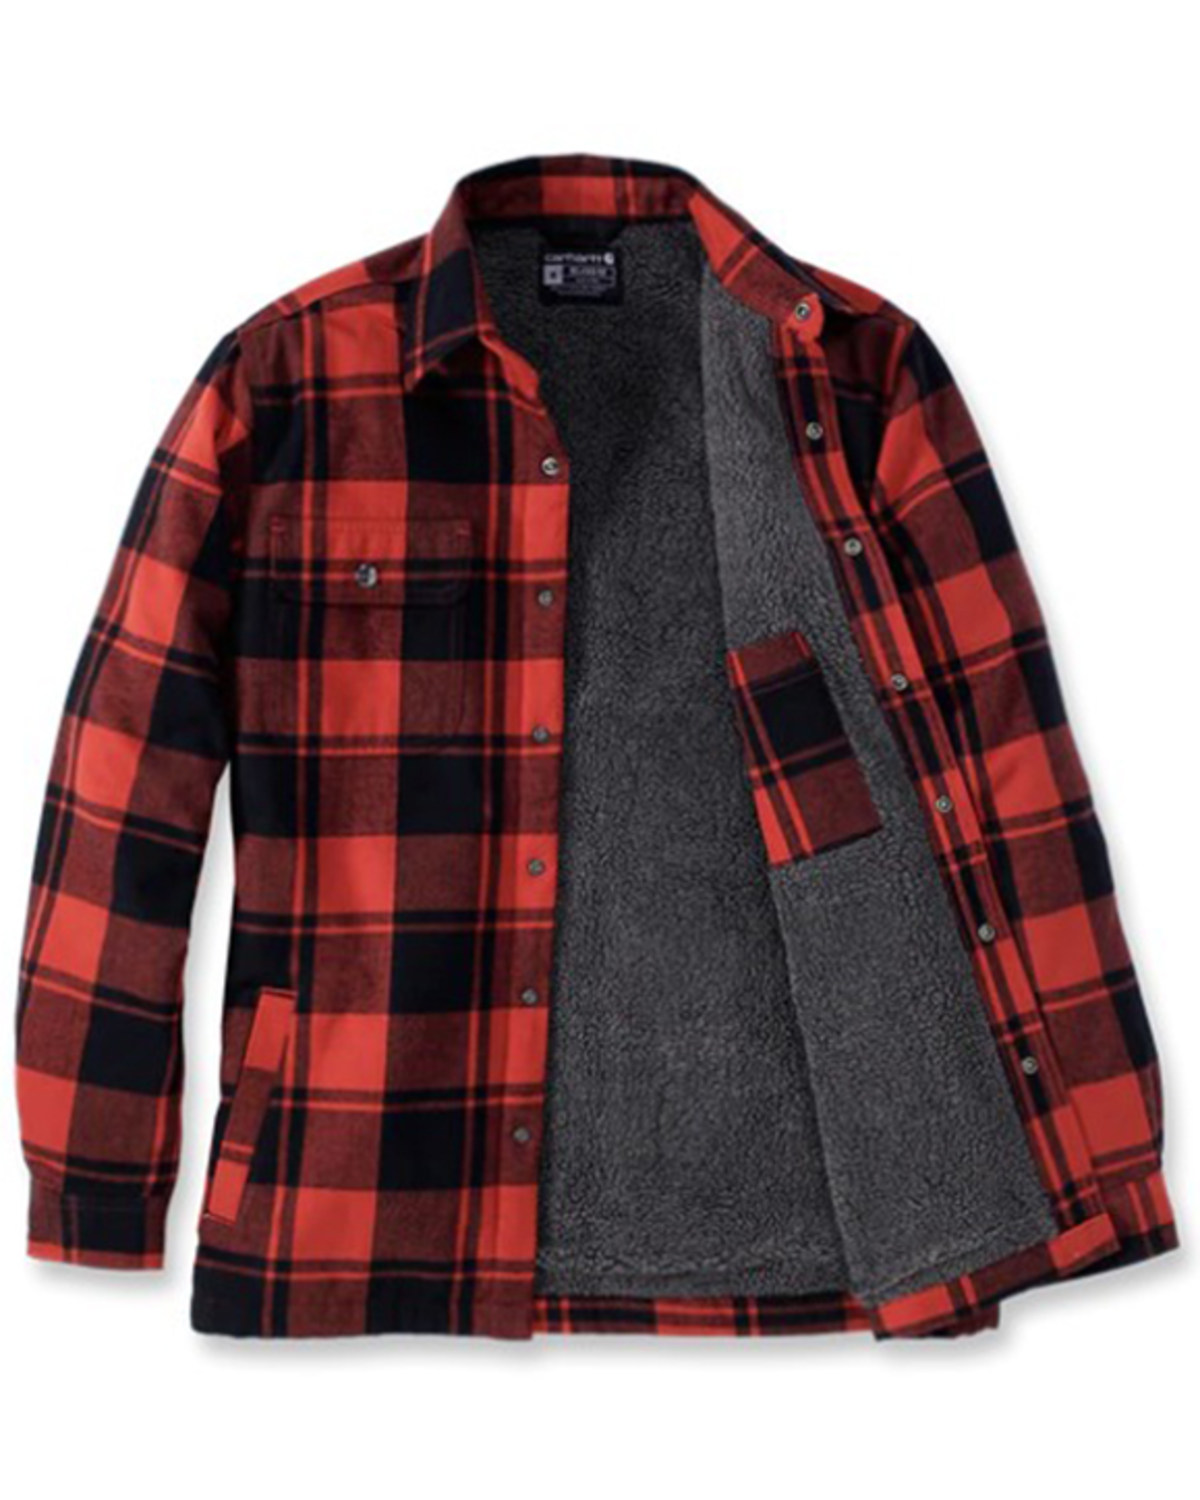 Carhartt Men's Relaxed Fit Sherpa Lined Flannel Shirt Jacket